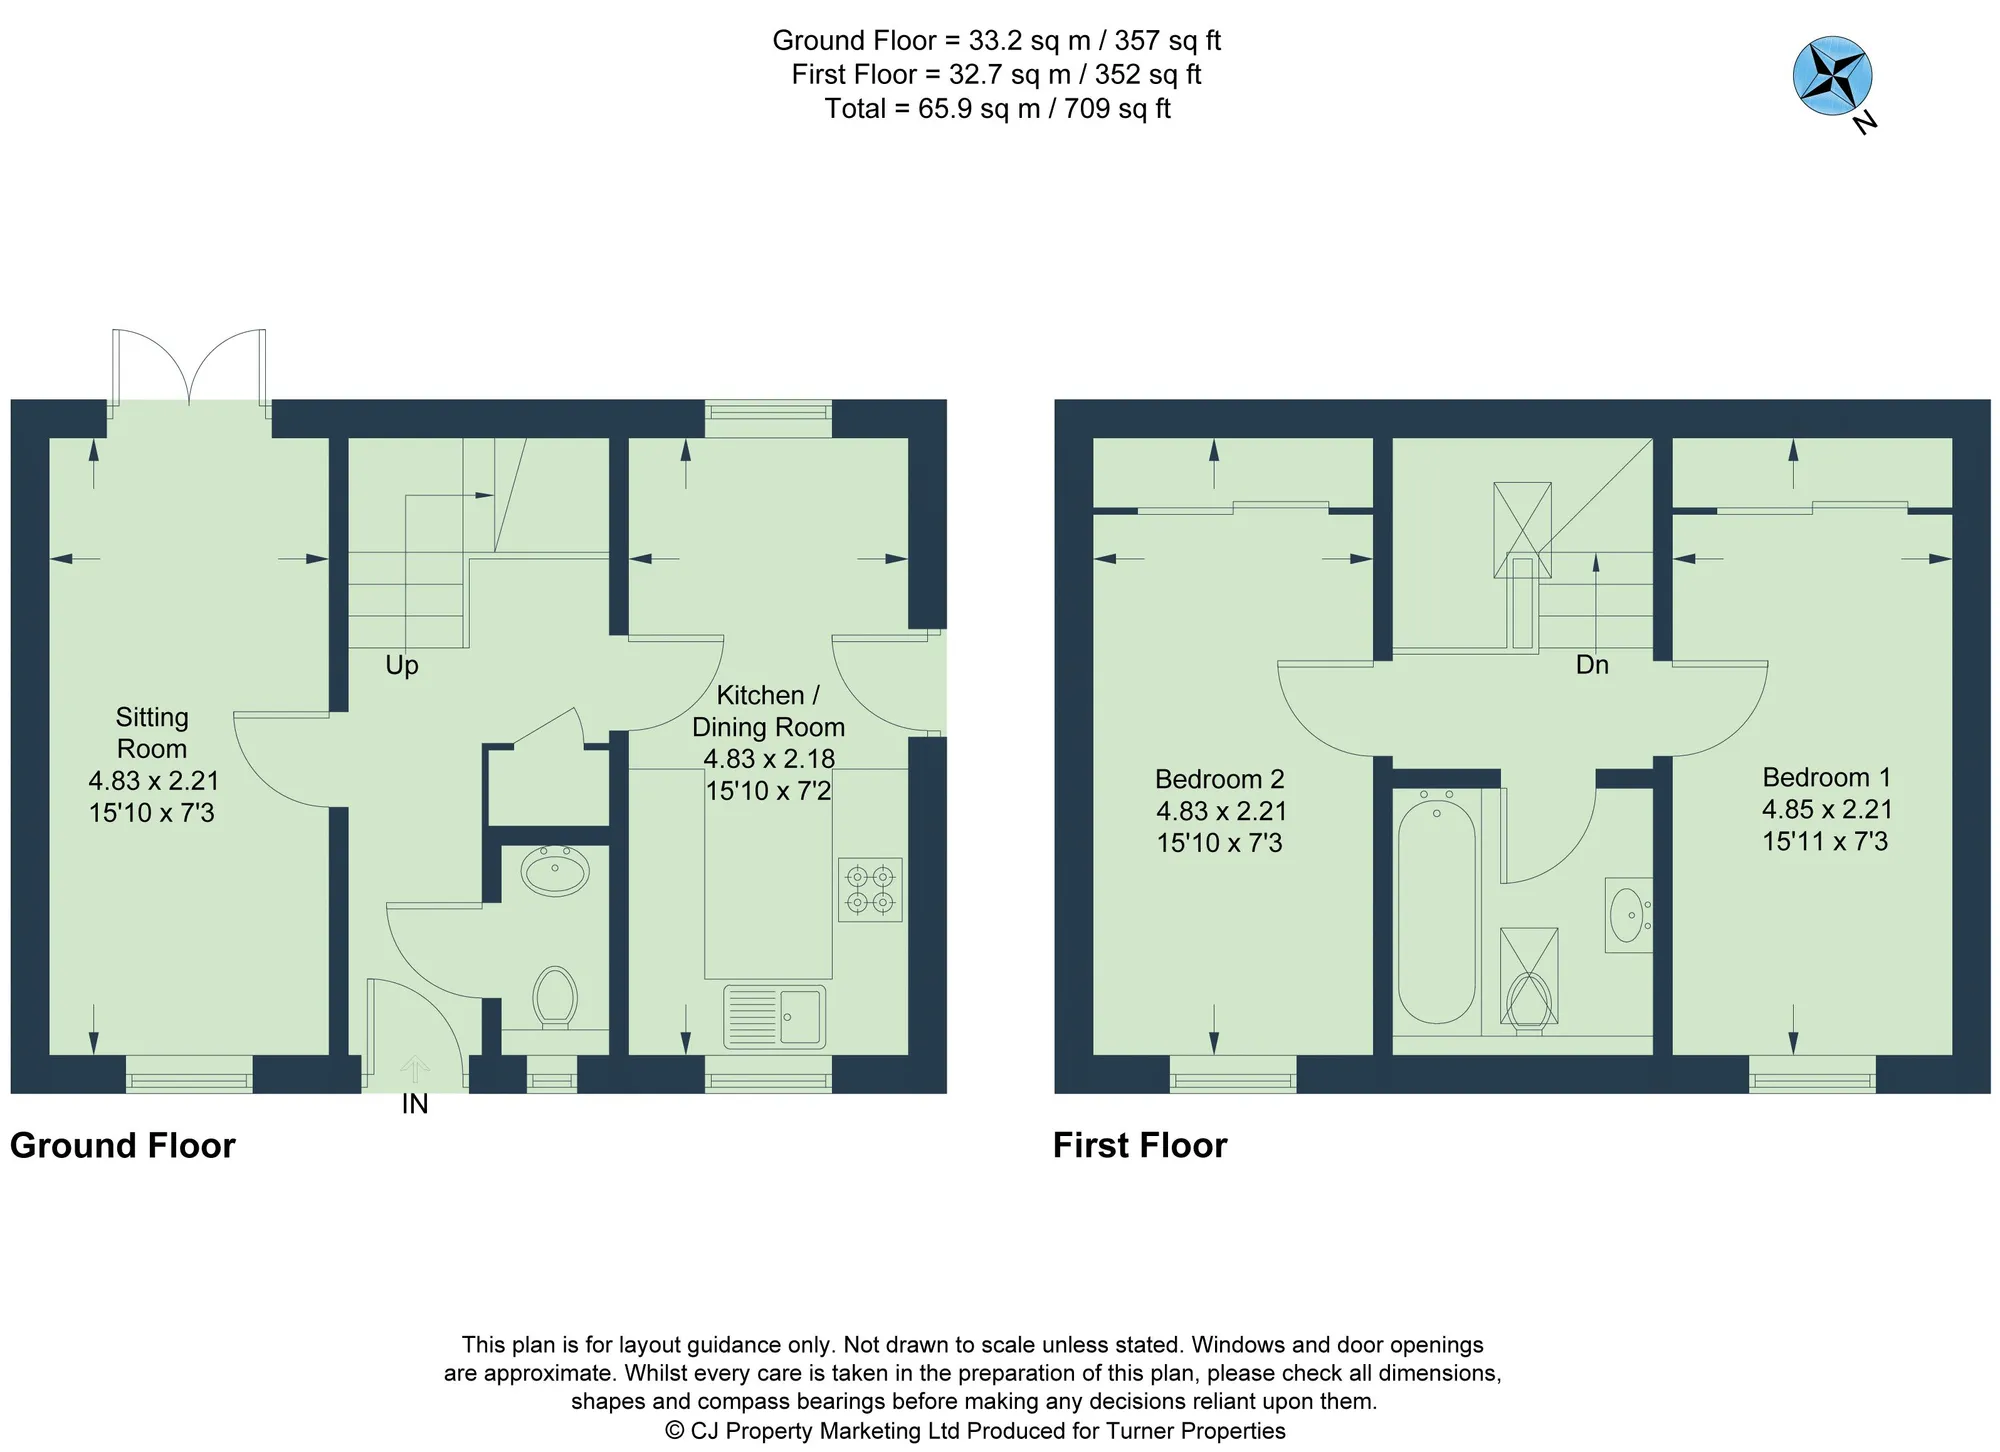 2 bed detached house to rent in Leyshon Road, Oxford - Property floorplan